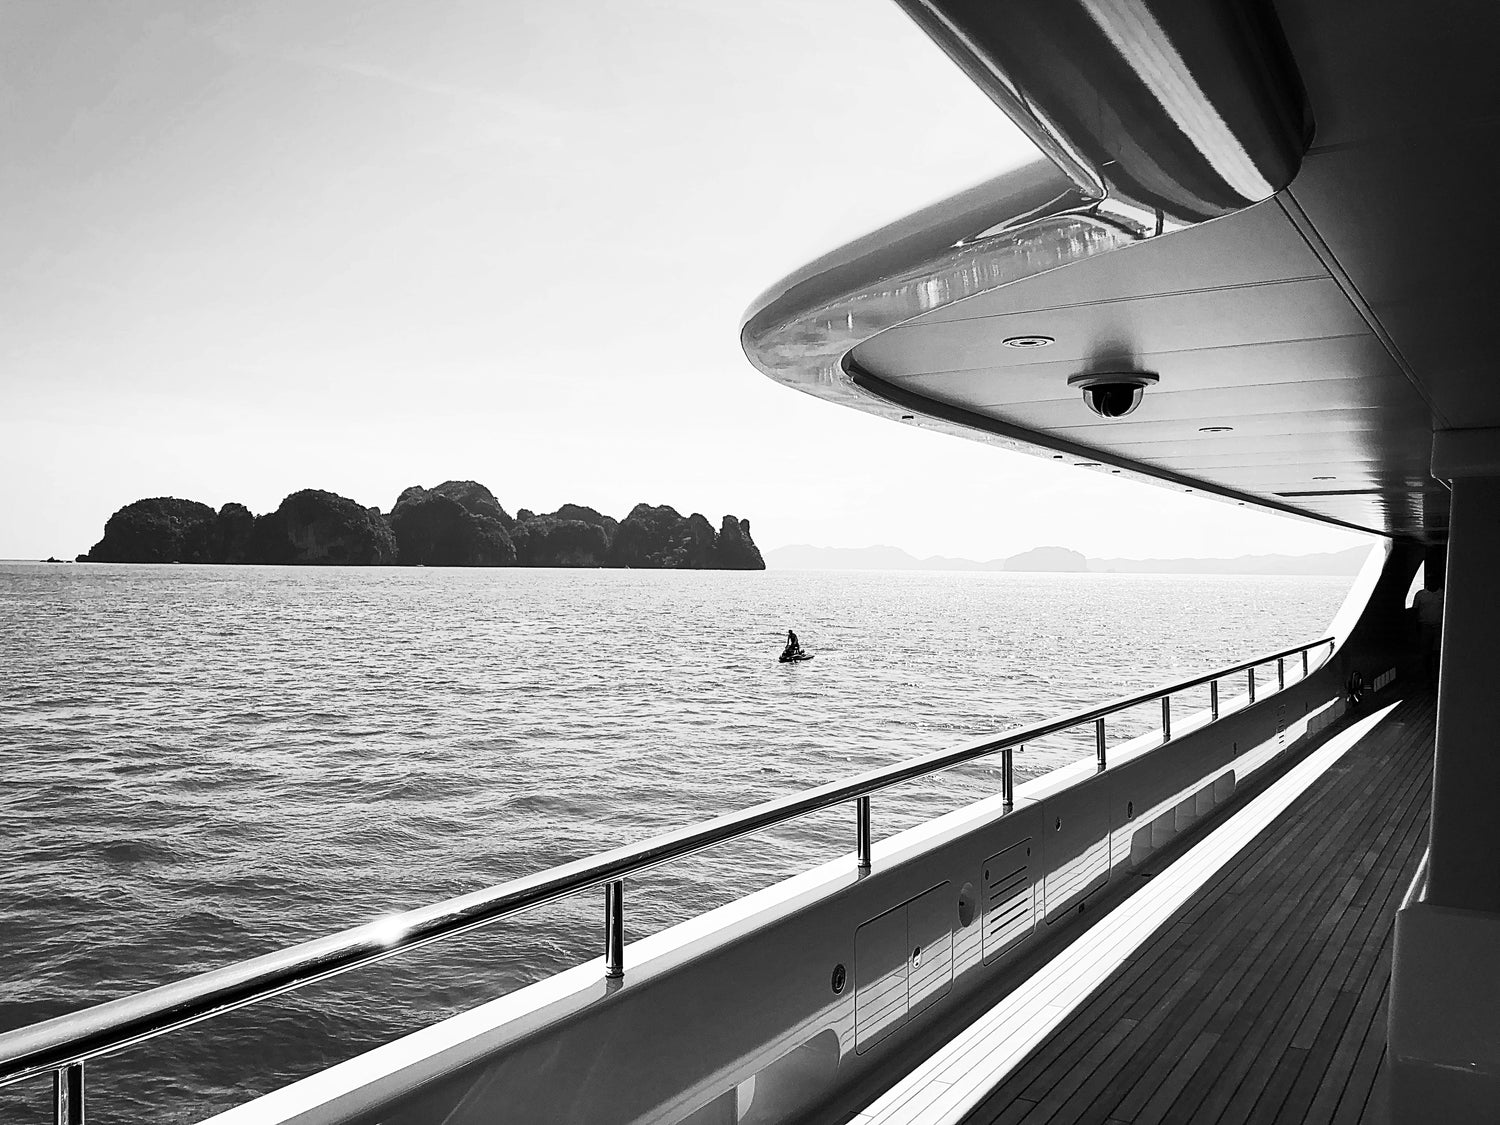 B+W view of an ocean island from the side of a yacht